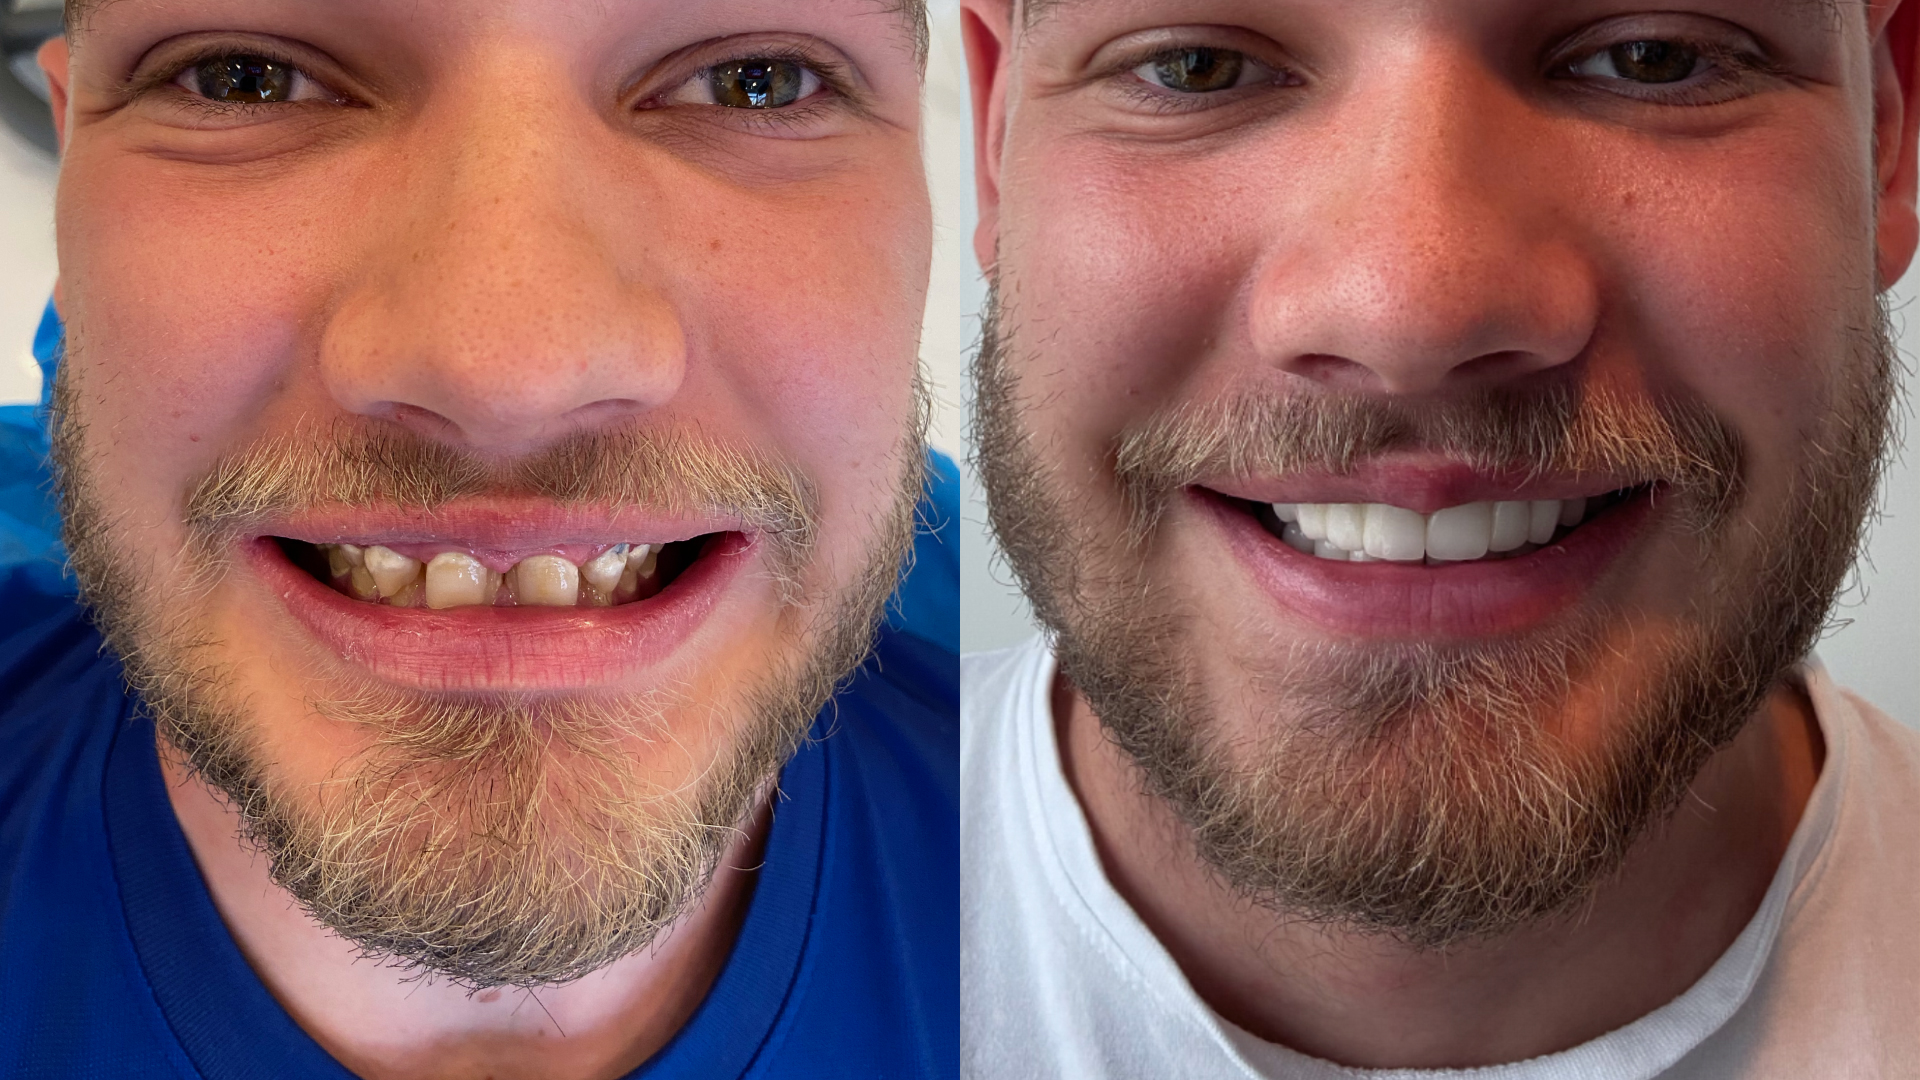 Before and After a Hollywood smile